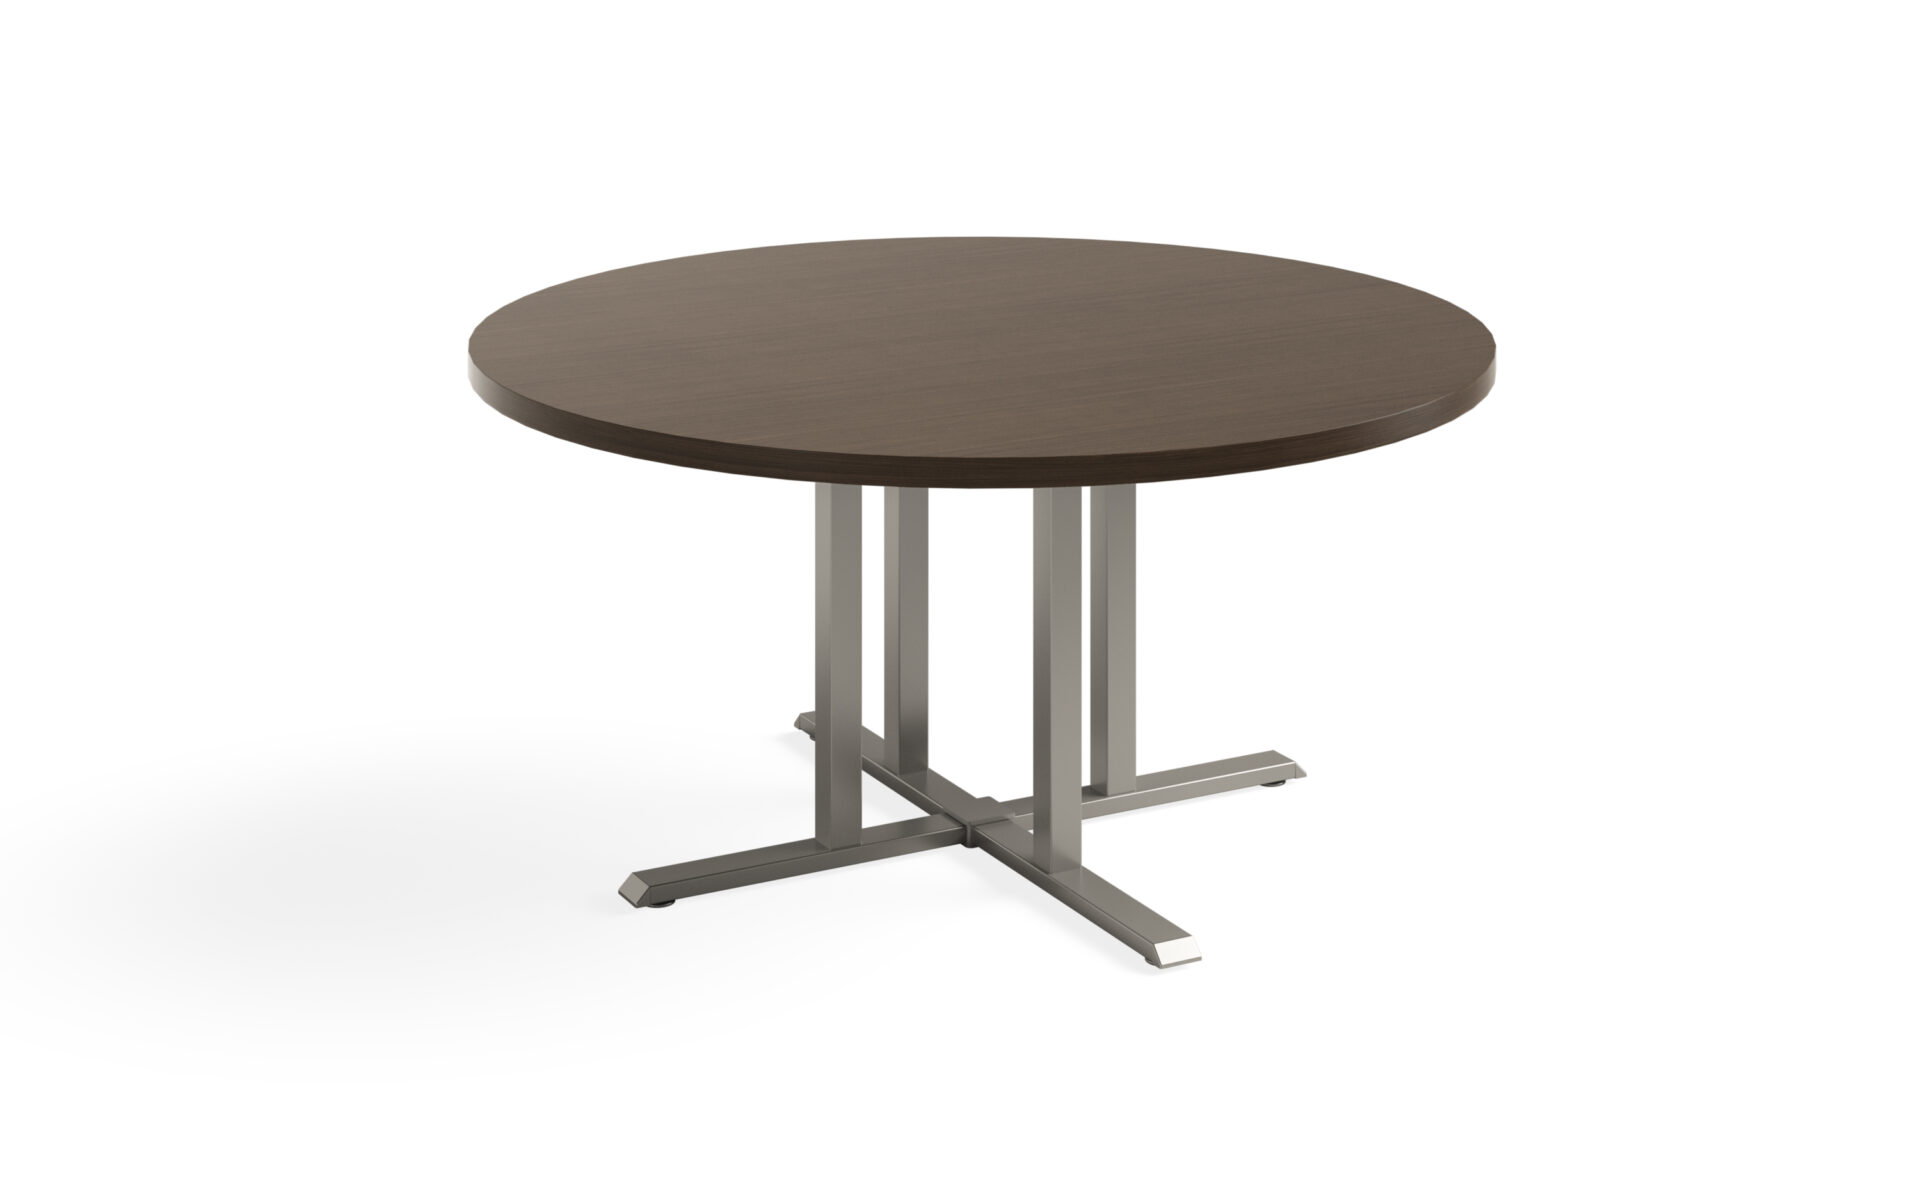 Fusion series table legs from Gibraltar featured with a roundtop table.